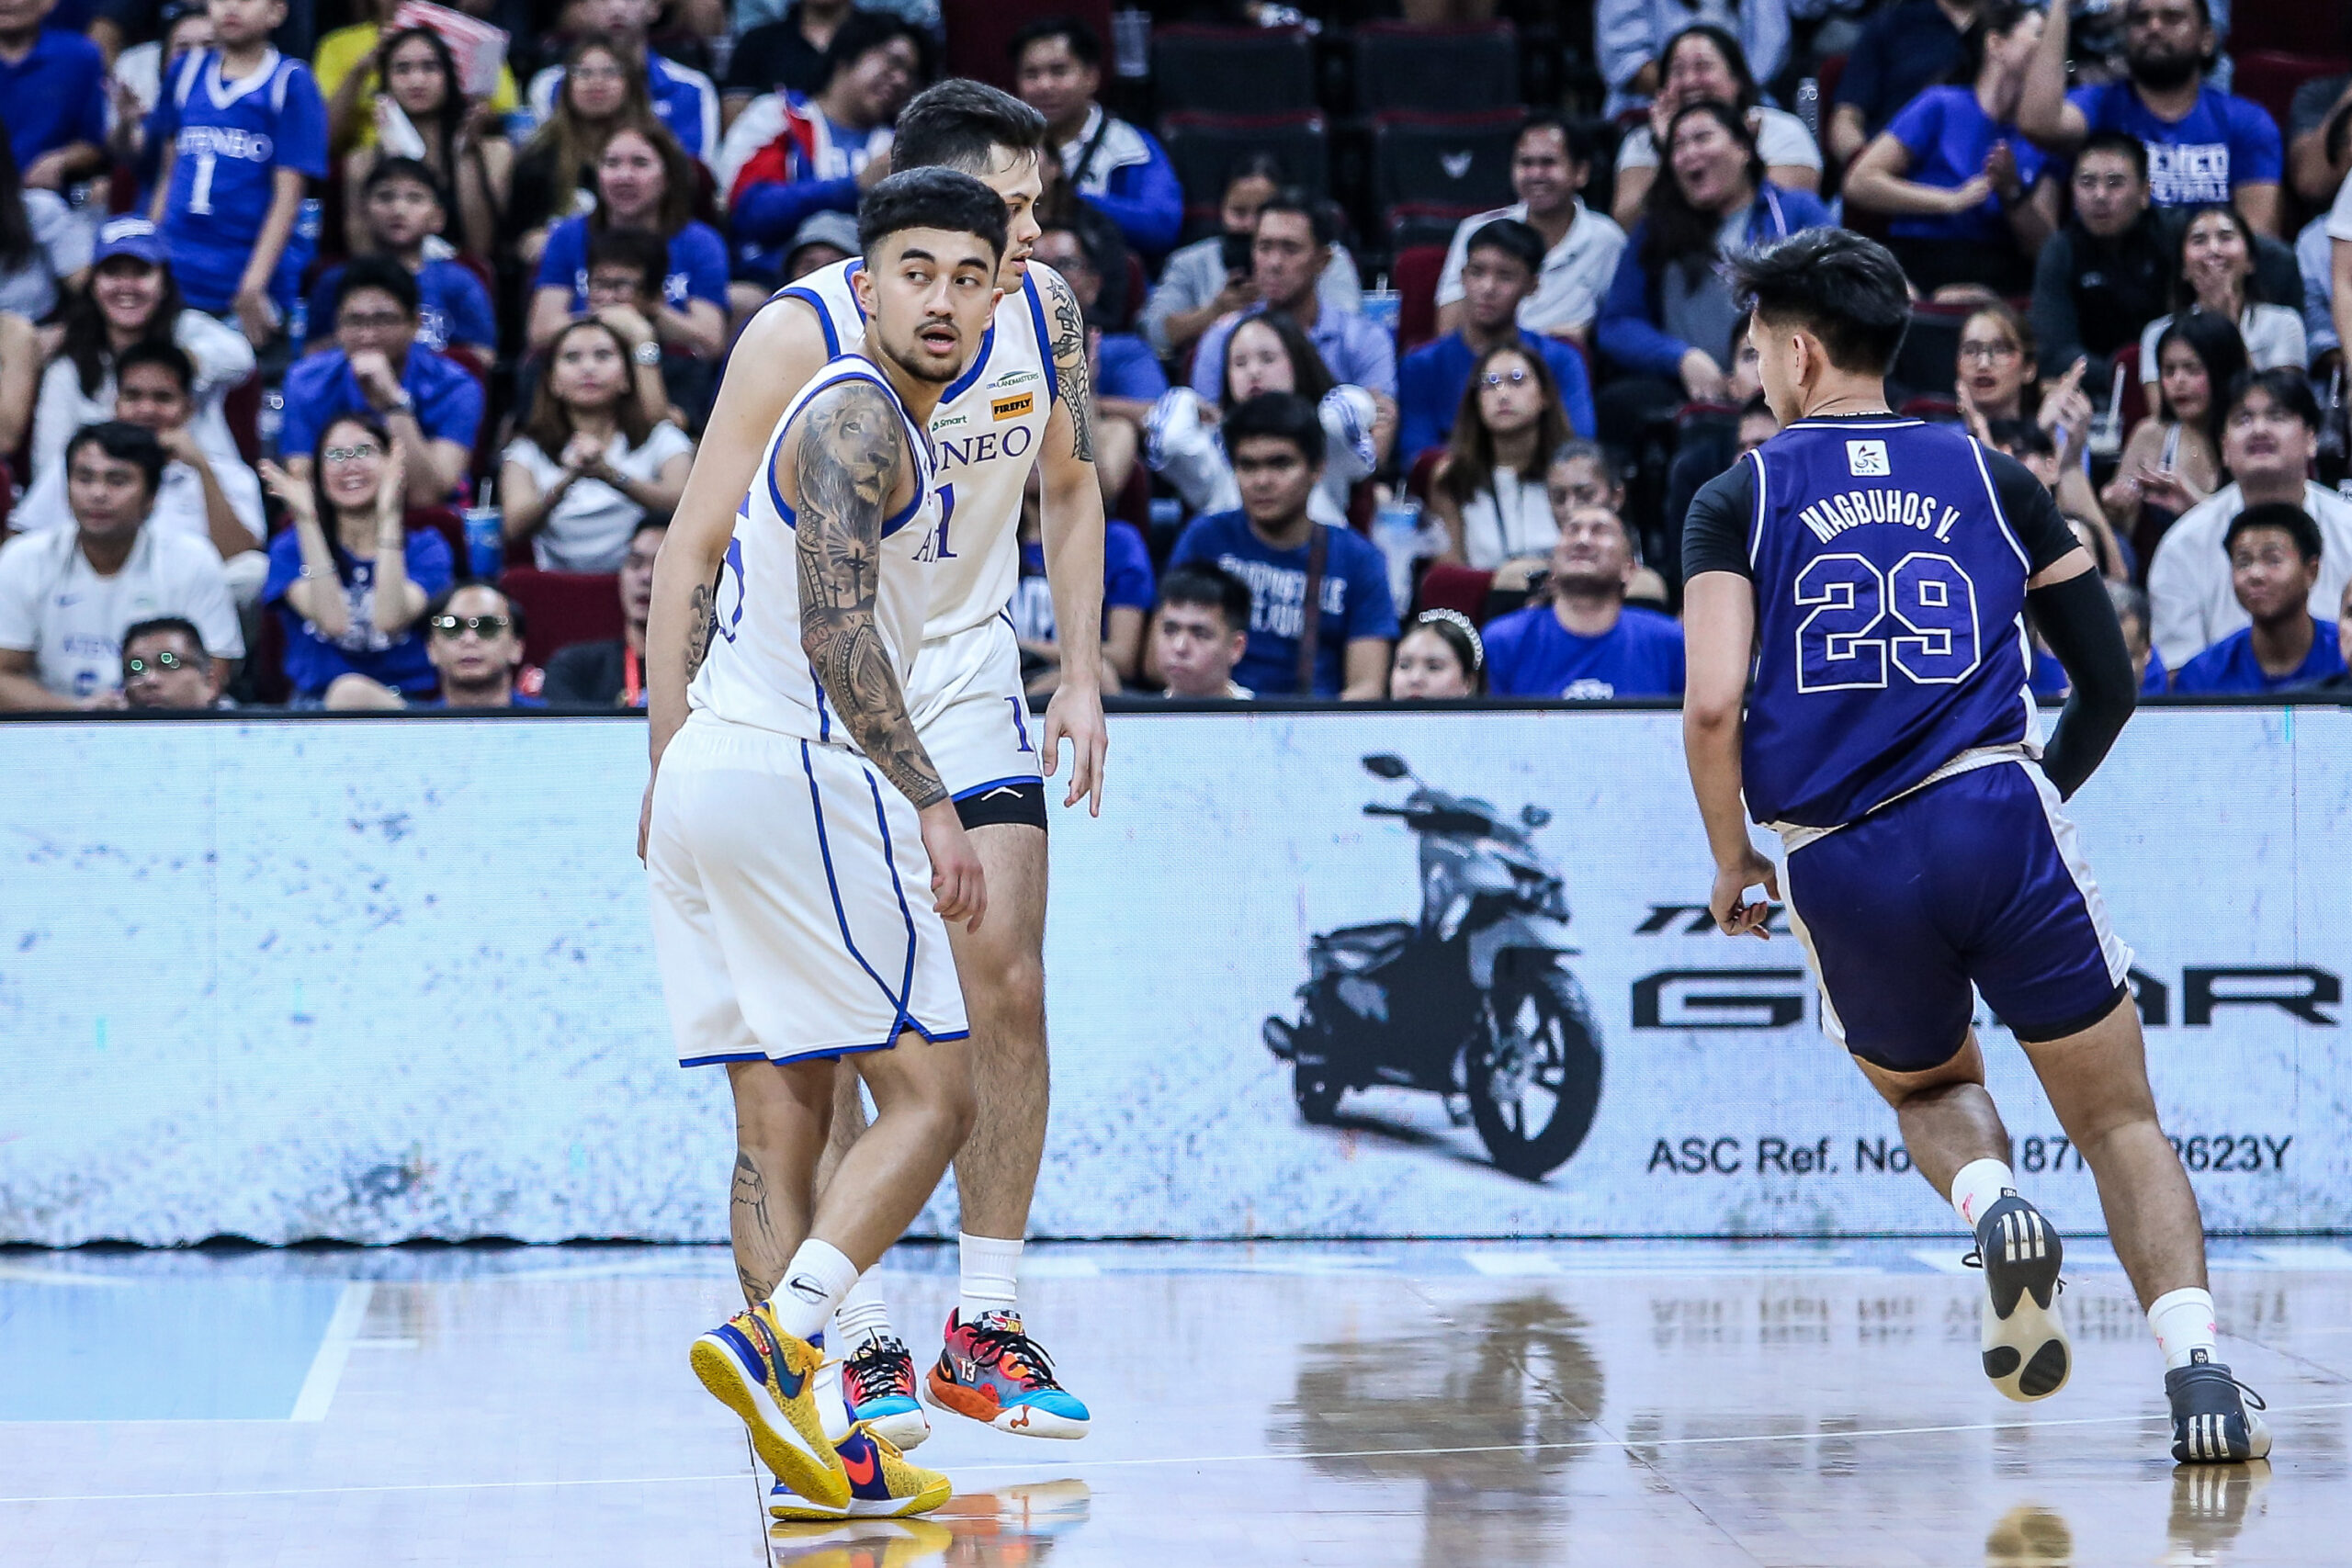 Ateneo Blue Eagles' Jared Brown in the UAAP Season 86 men's basketball tournament. –MARLO CUETO/INQUIRER.net